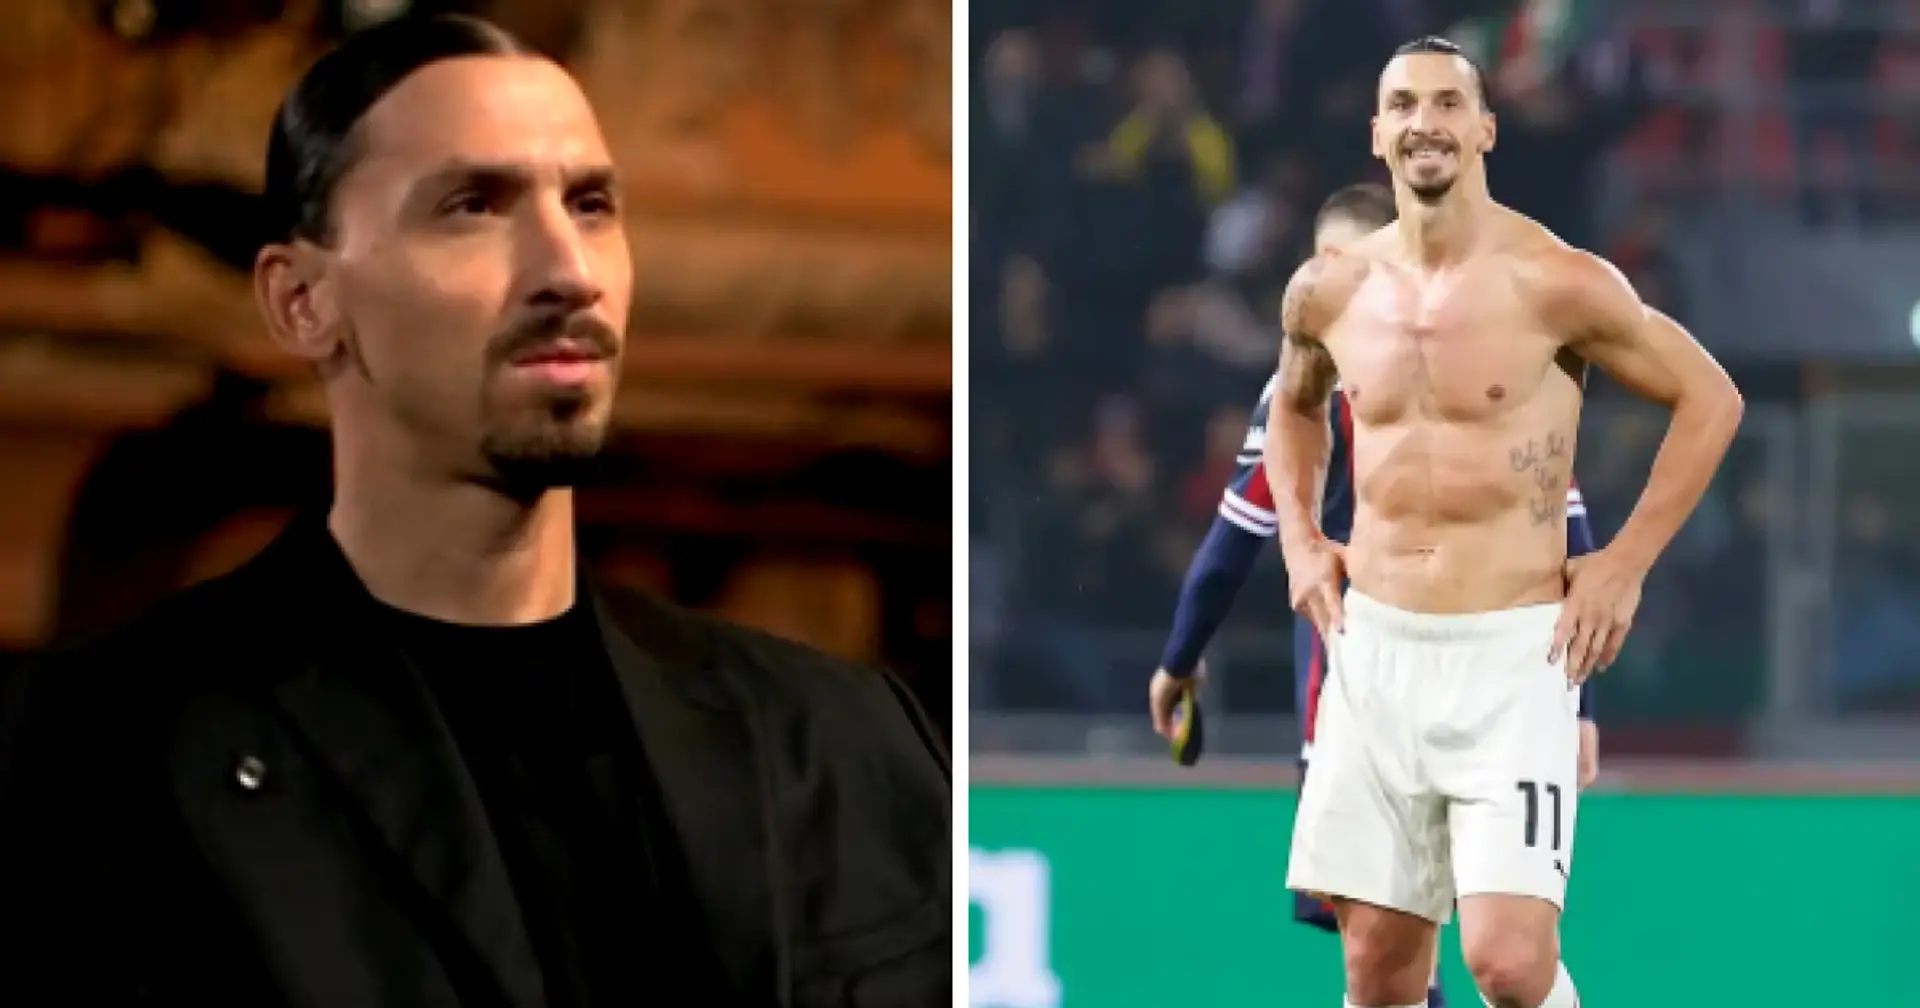 'When I say I am God, I am not joking': Zlatan Ibrahimovic in Piers Morgan interview